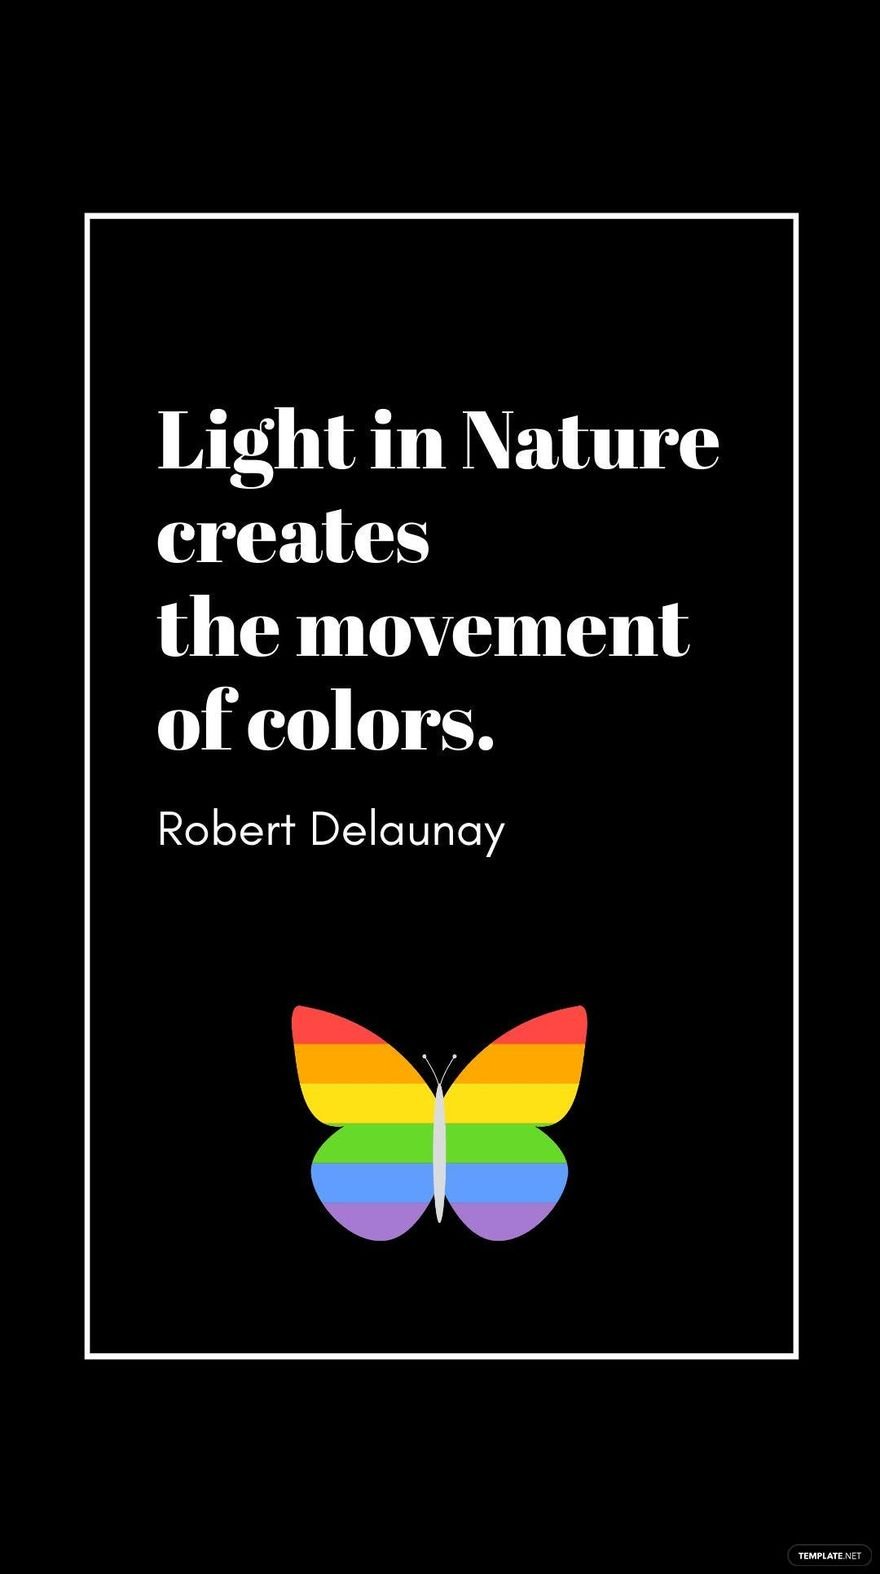 Free Robert Delaunay - Light in Nature creates the movement of colors. in JPG